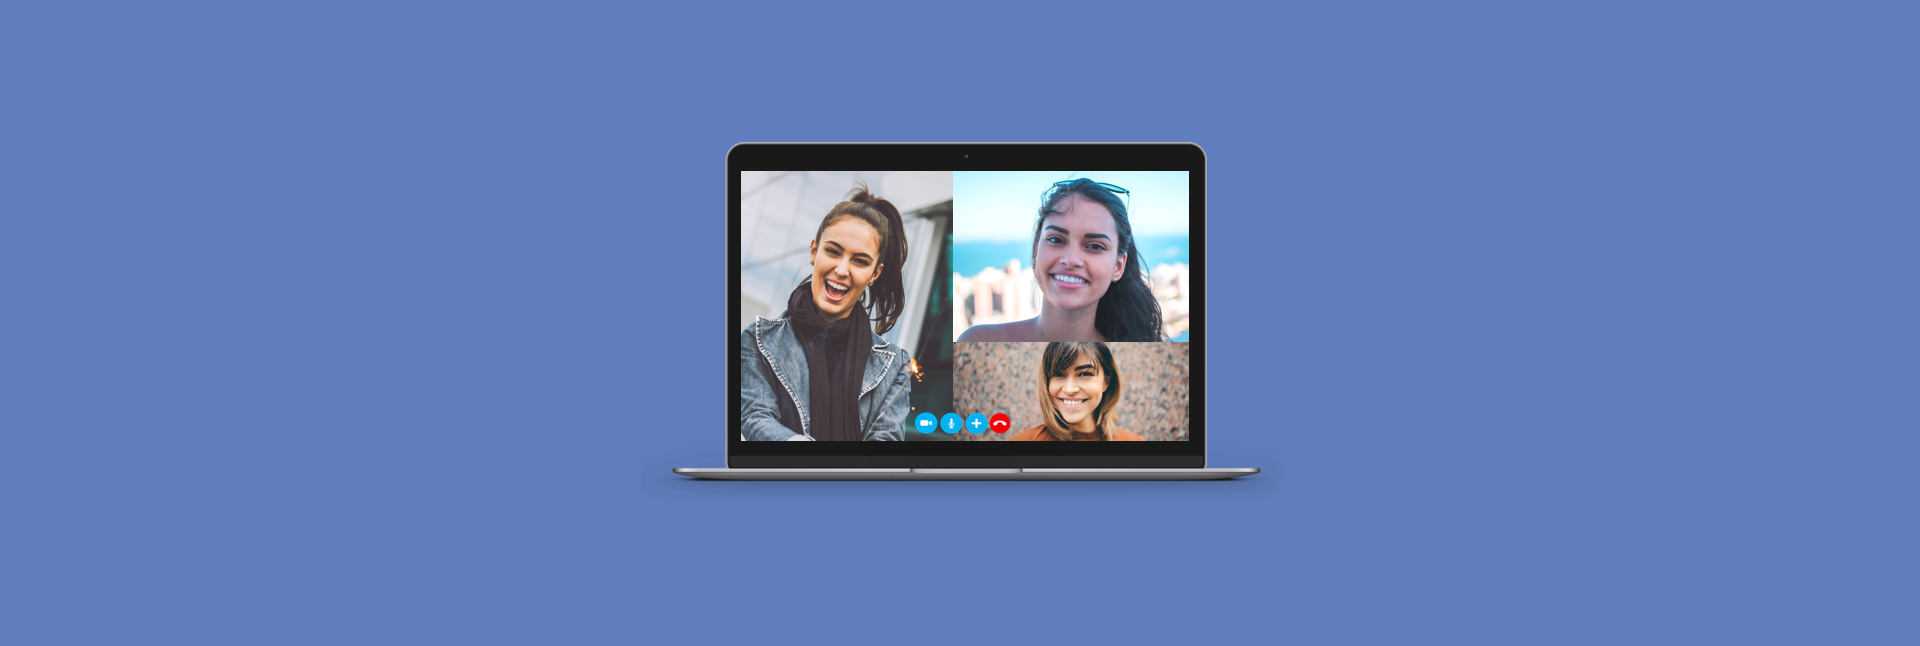 skype video chat download